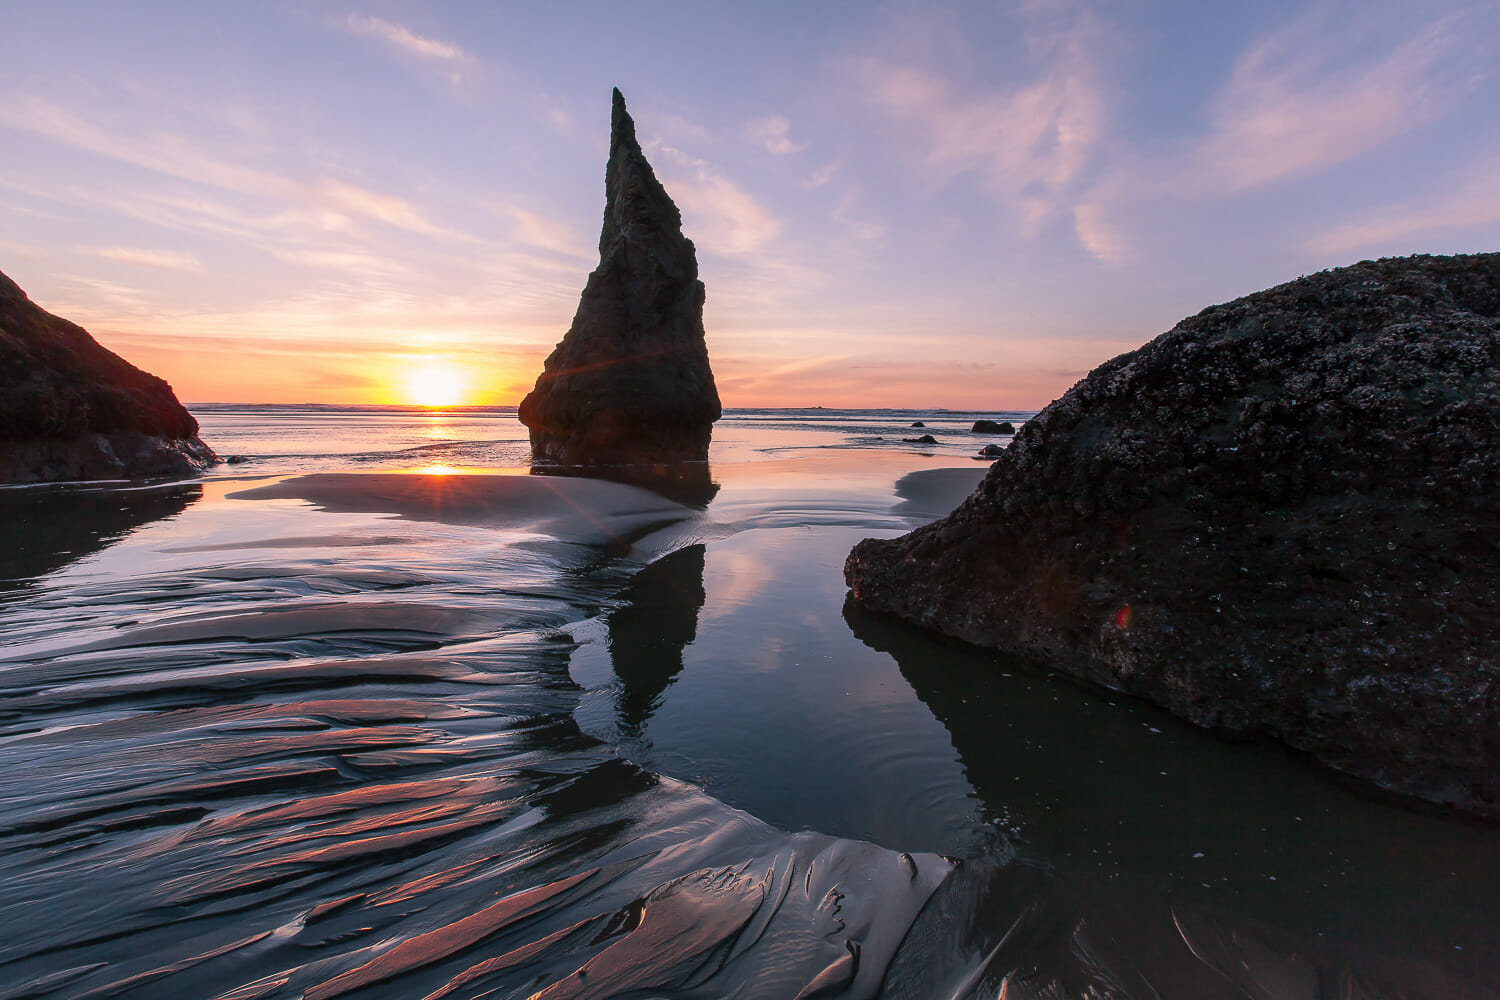 Rock formations at Bandon Beach in Oregon at sunset with a low tide